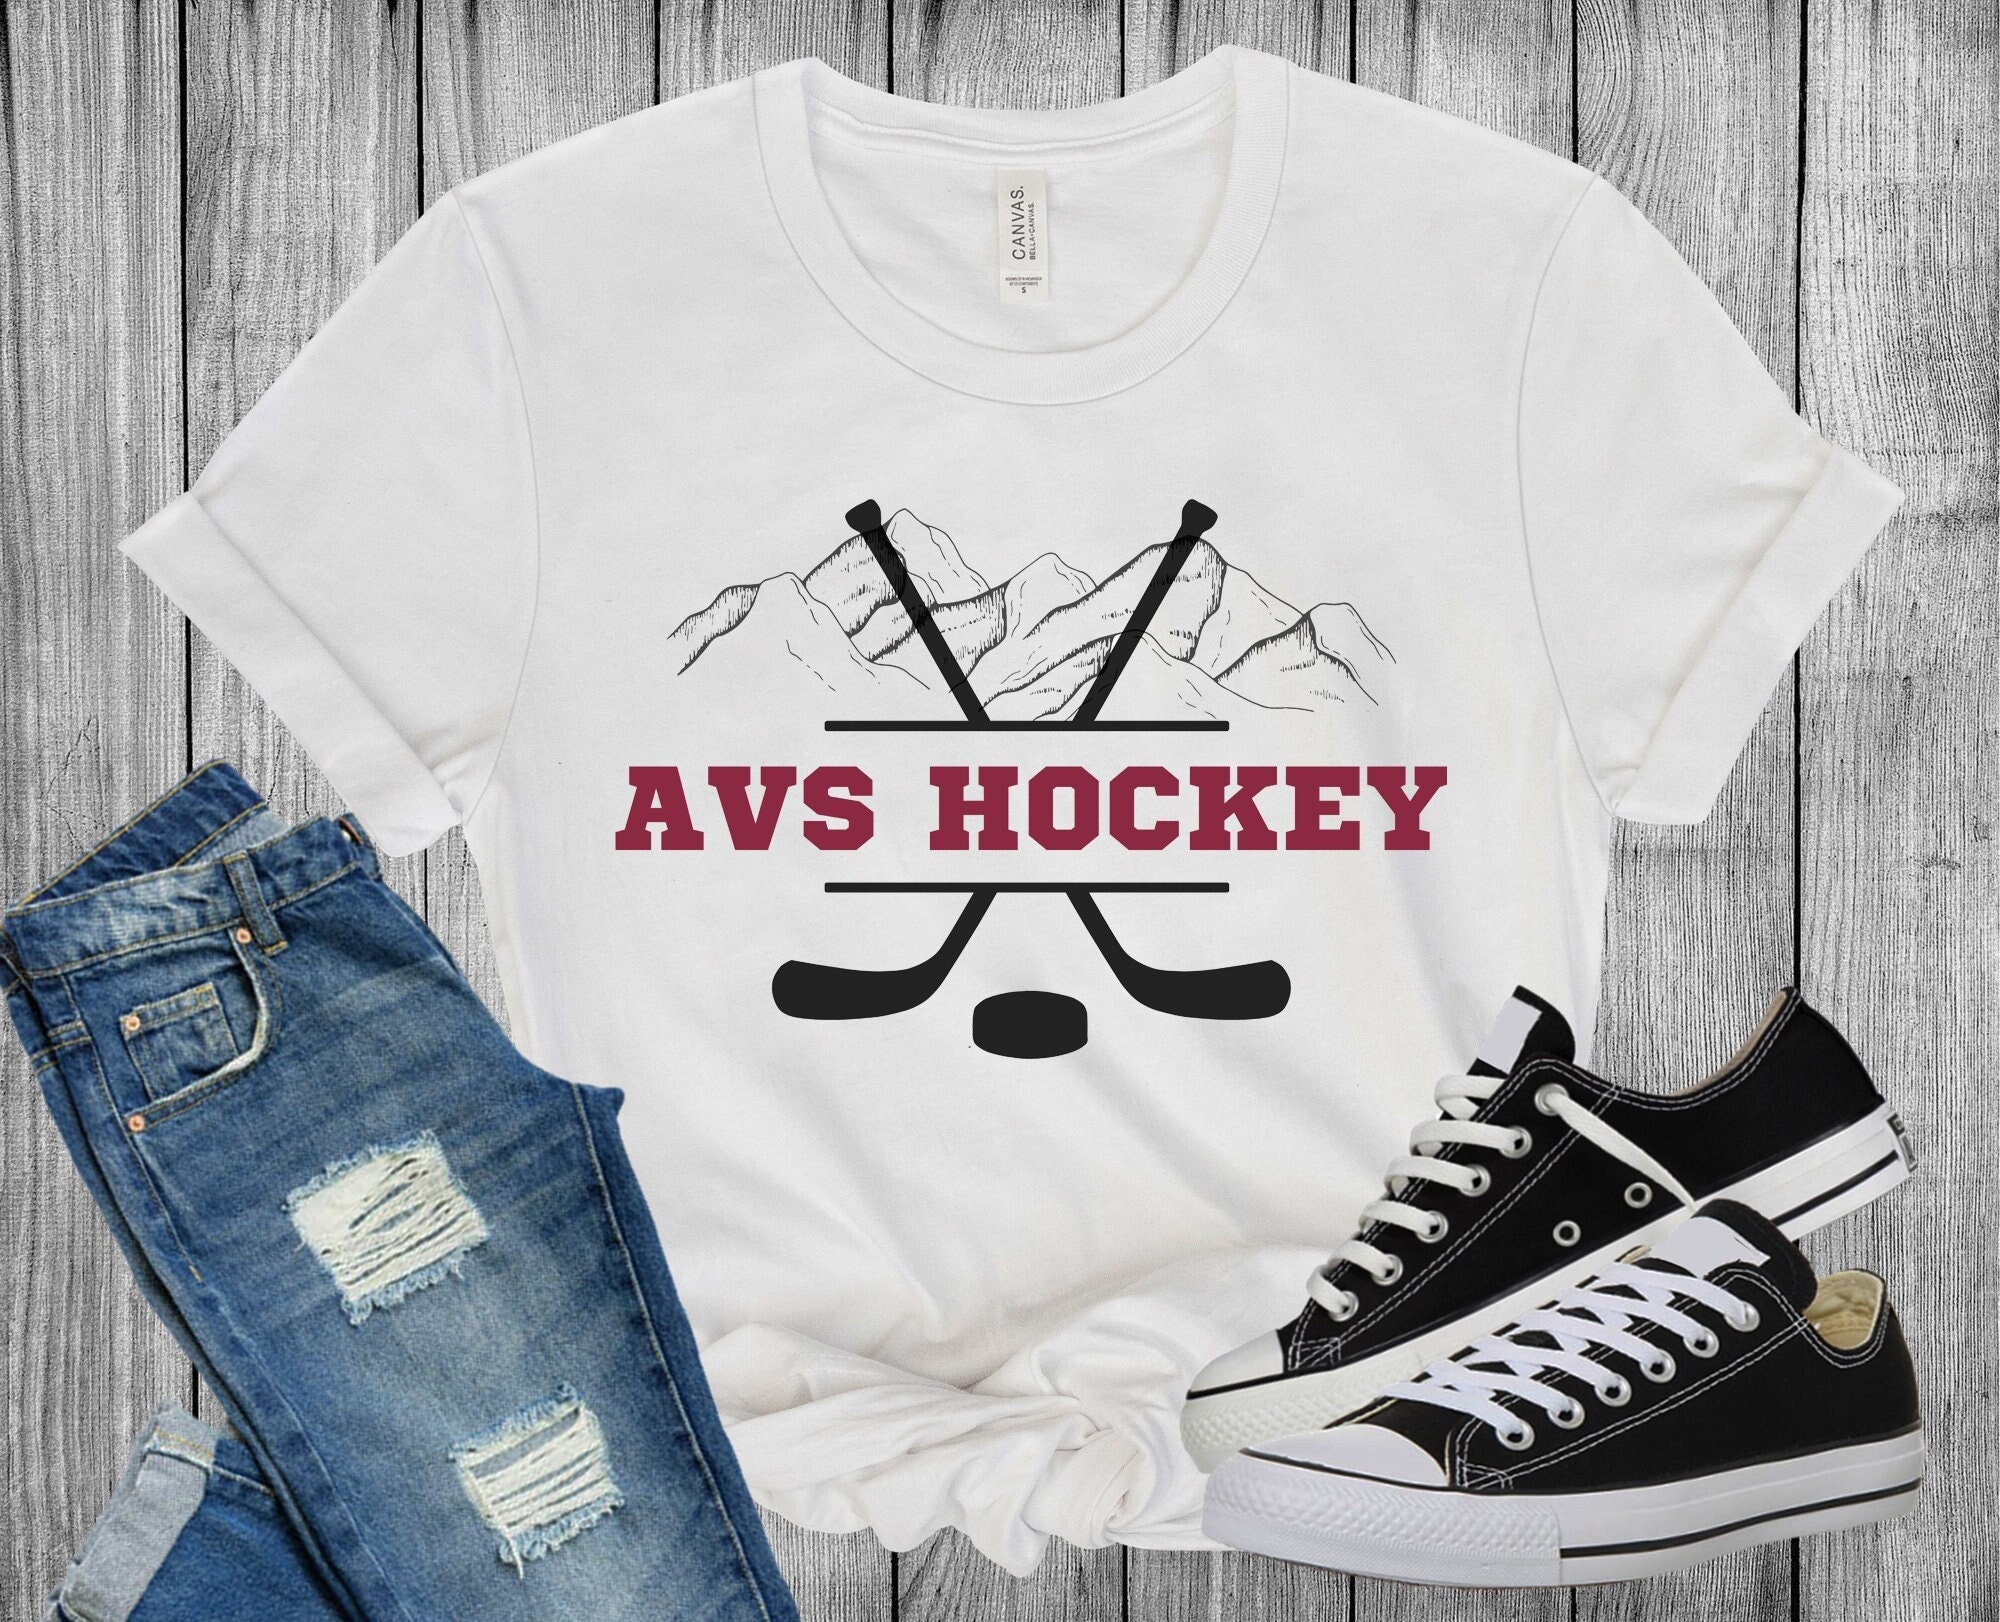 Hockey T-Shirts for Sale